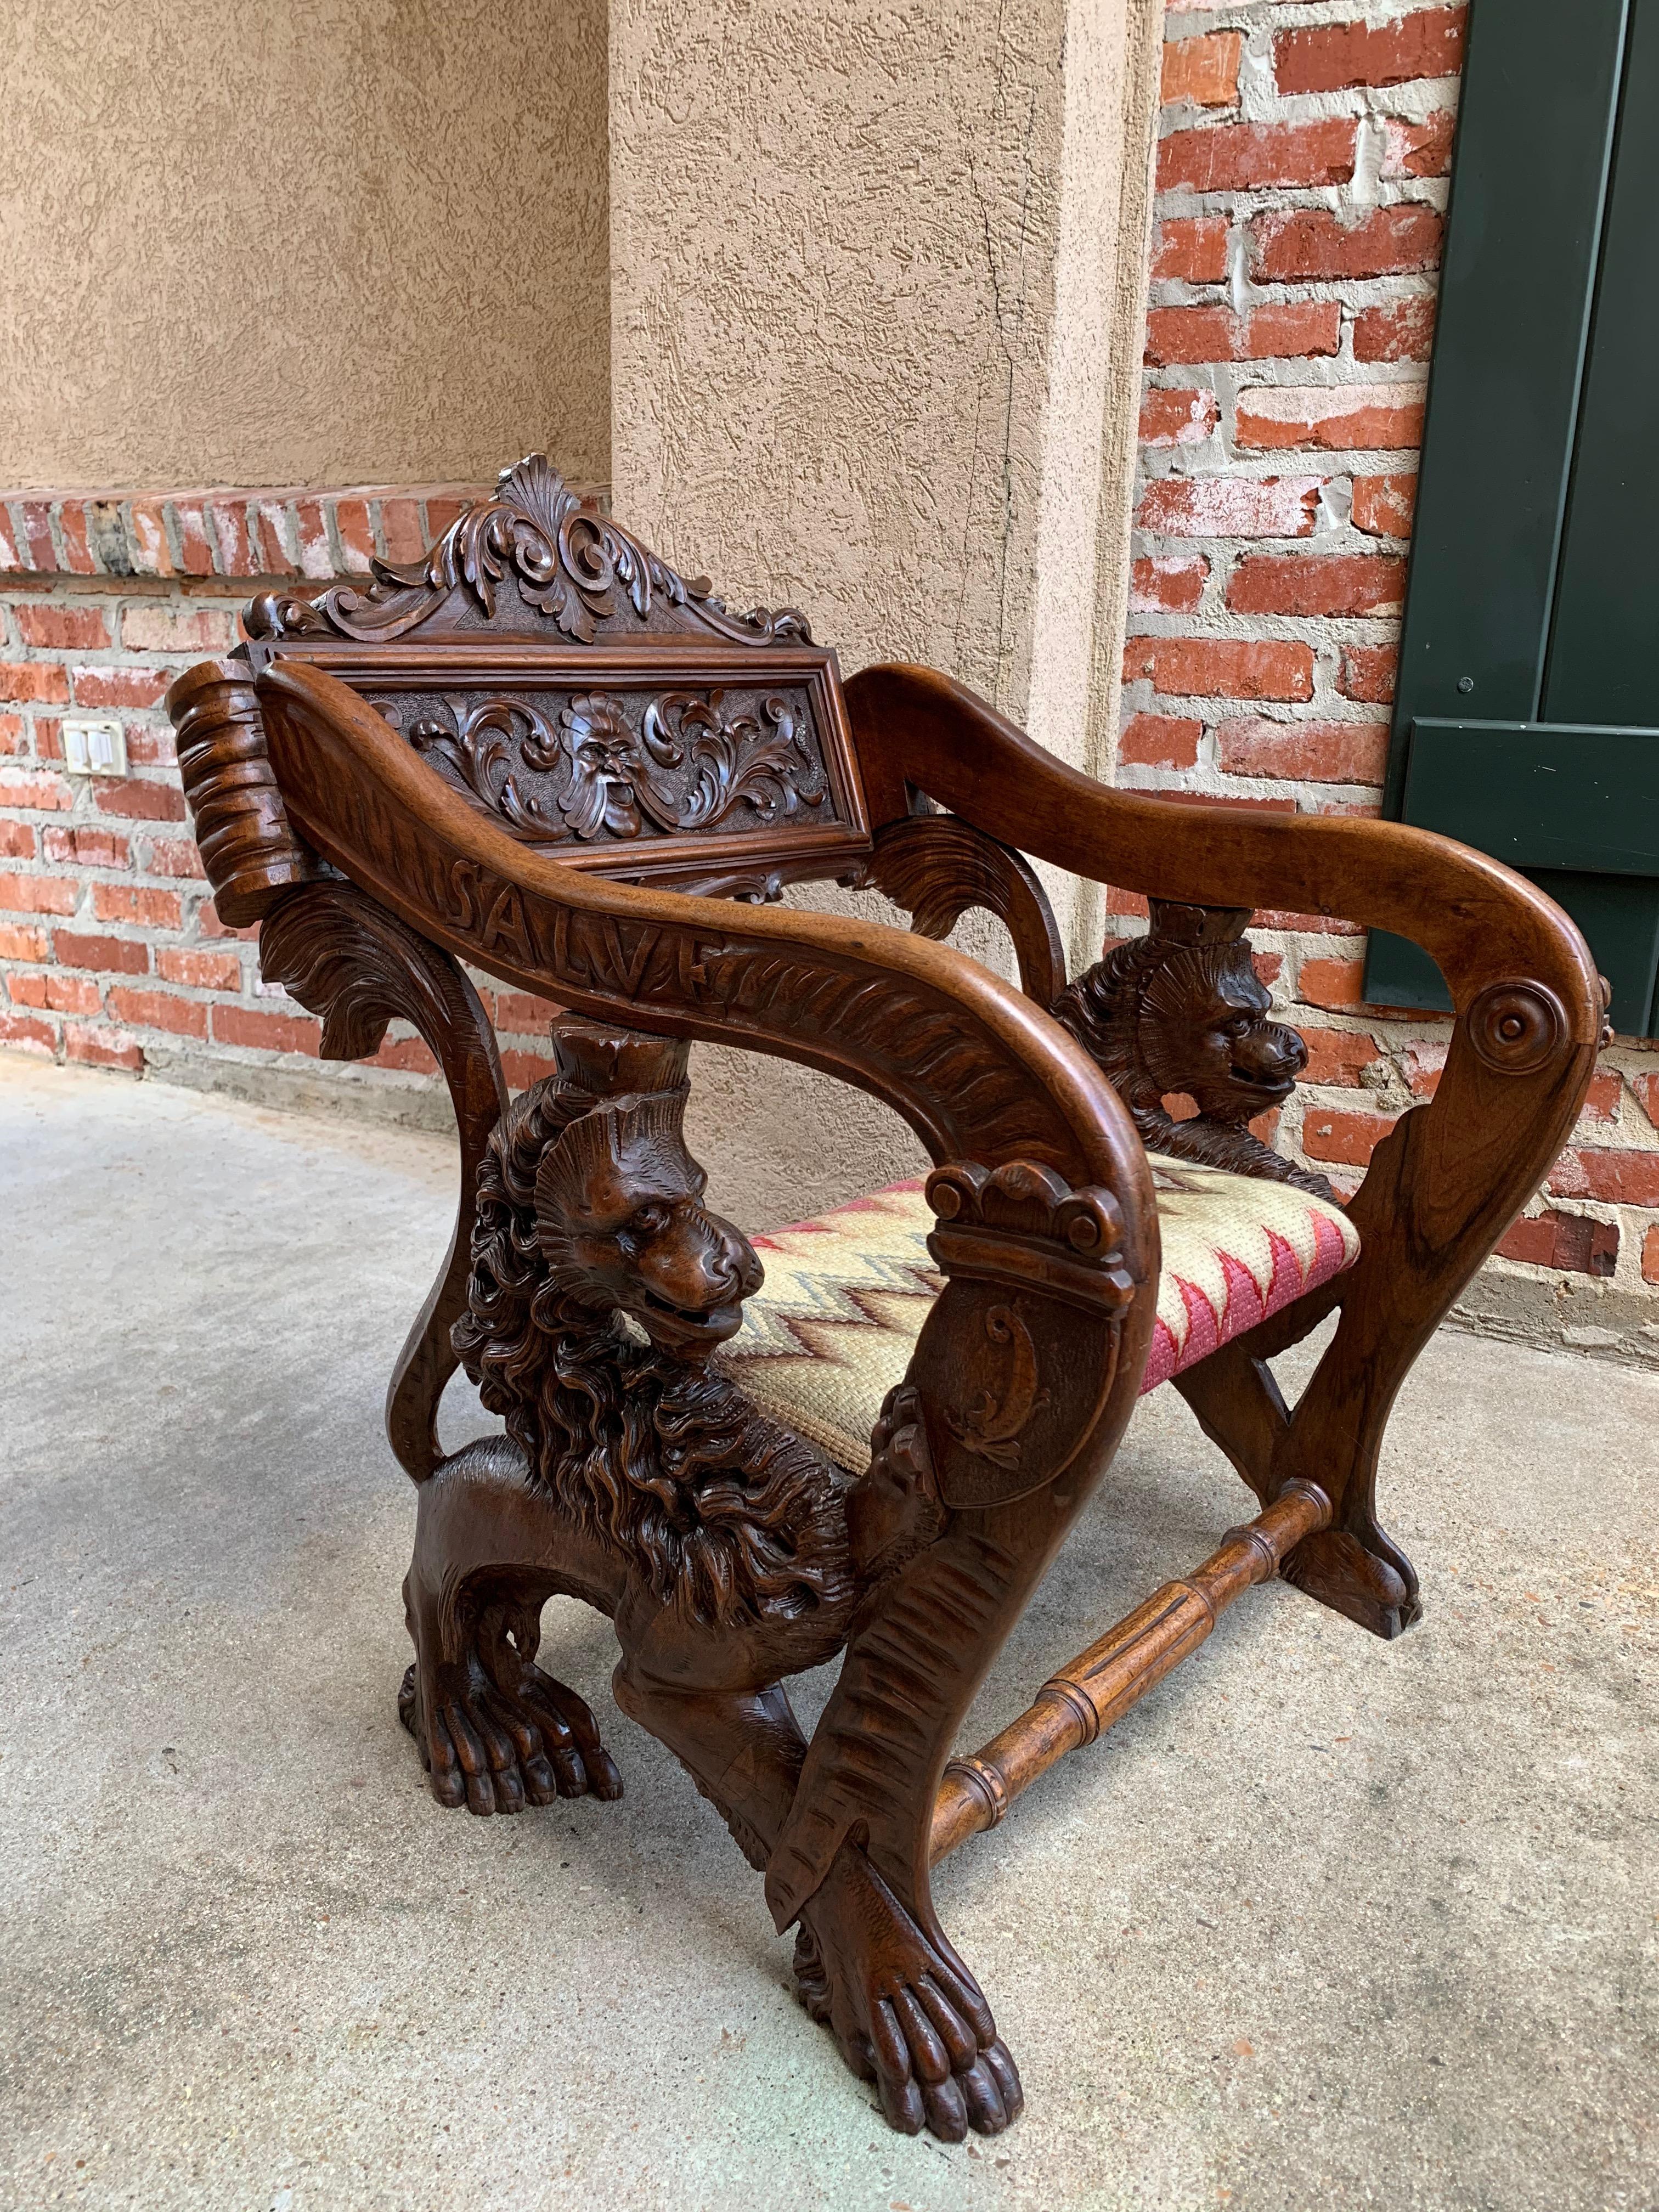 Direct from France, a very unique altar chair, with breathtaking hand carved designs~
~Dimensional rampant lions form each side, with their crown supporting the arms and their claw feet forming the base. Notice the lion’s mane, facial features,